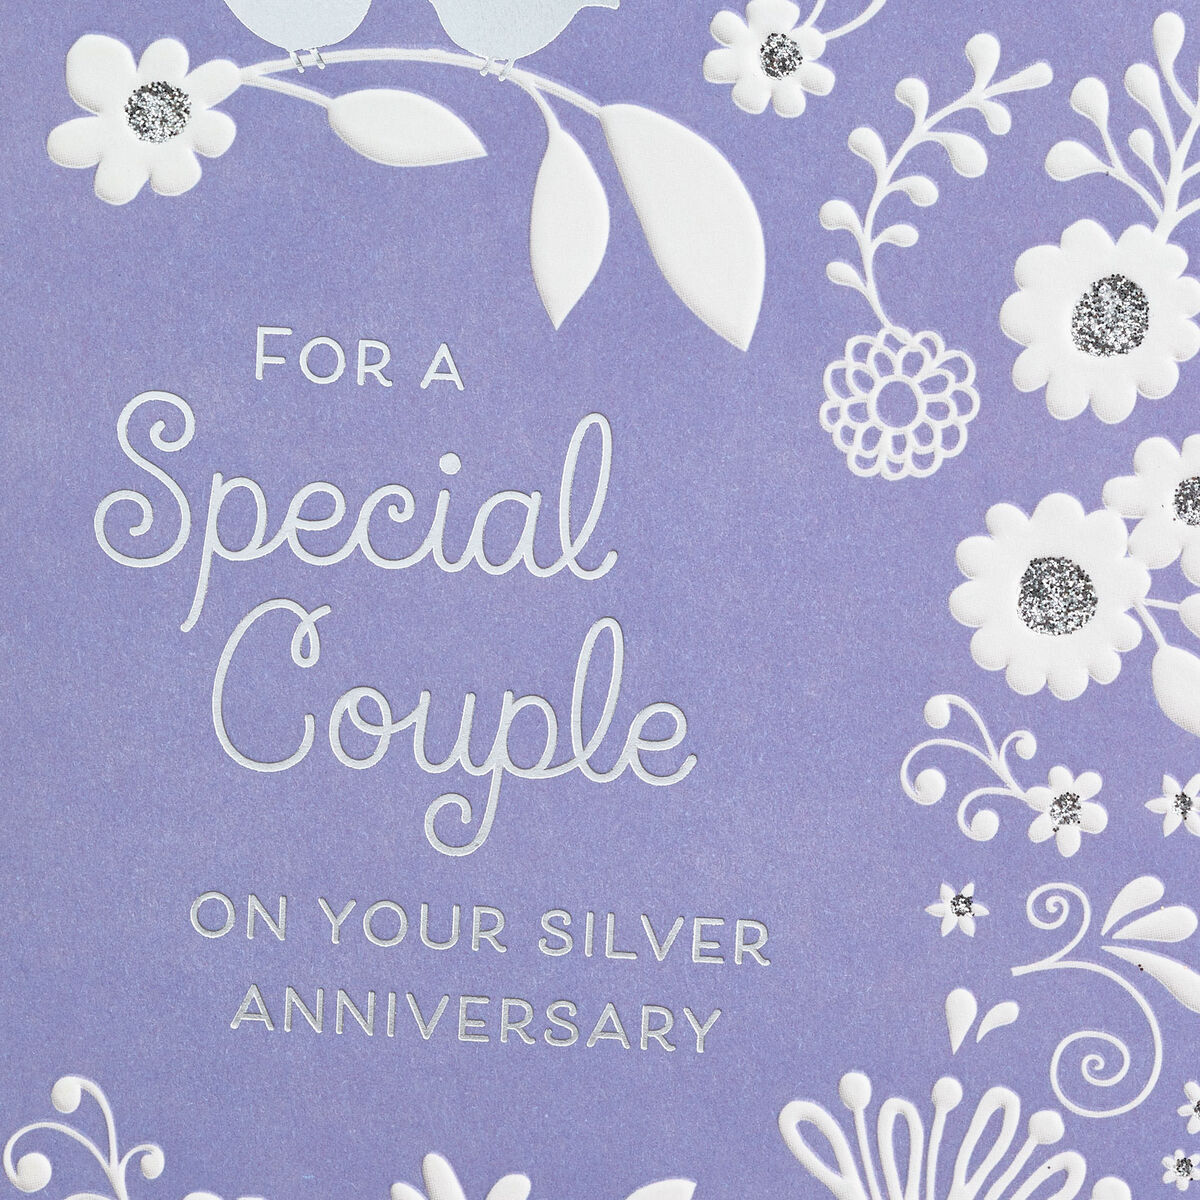 For a Special Couple 25th Anniversary Card - Greeting Cards - Hallmark